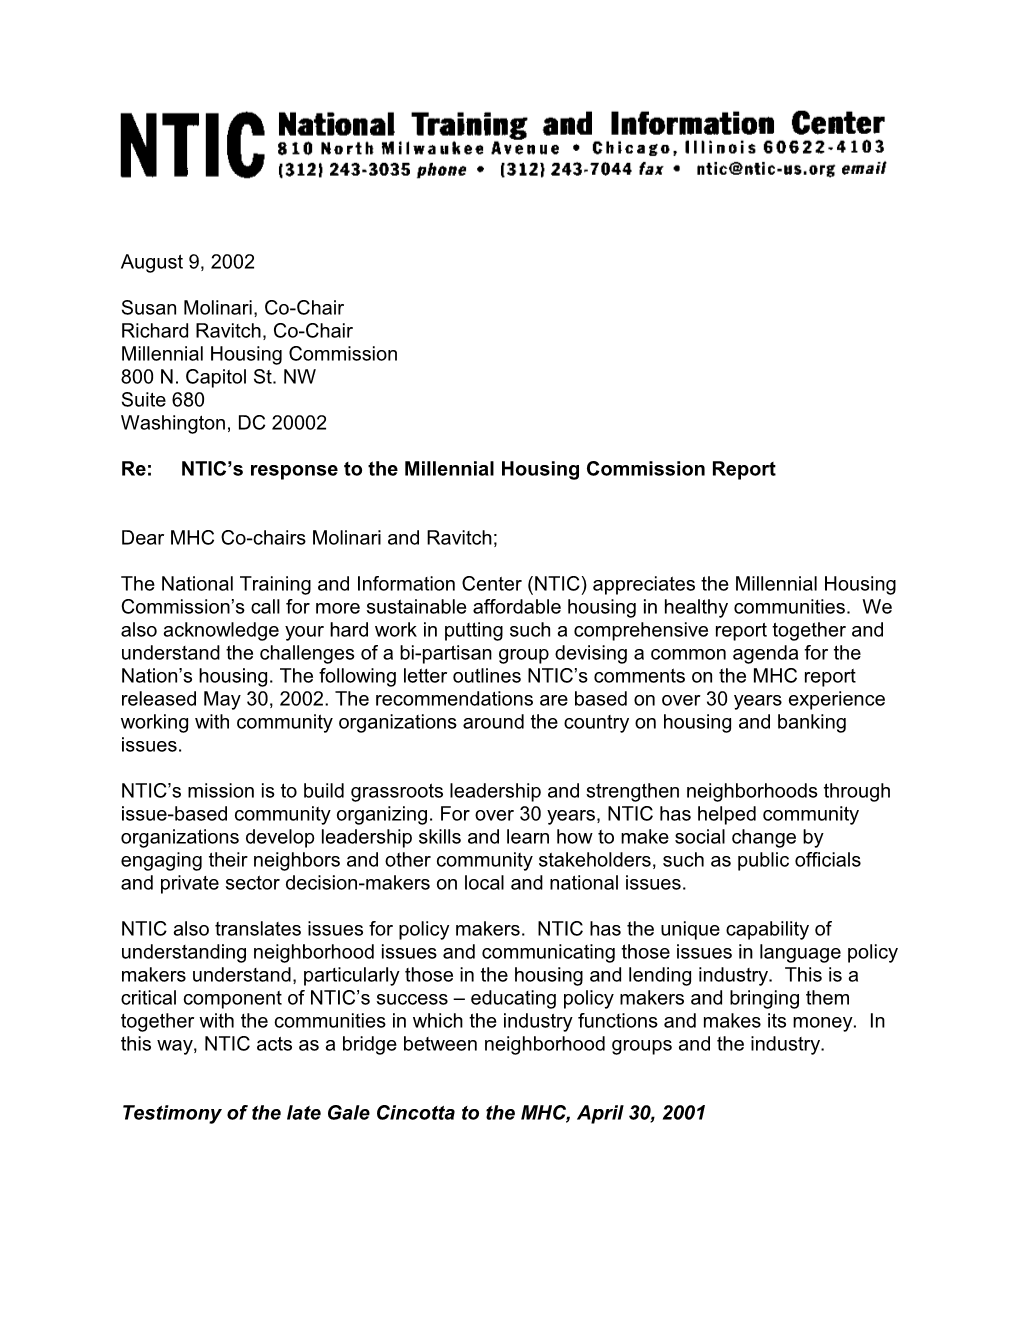 NTIC S Response to the MHC S Report